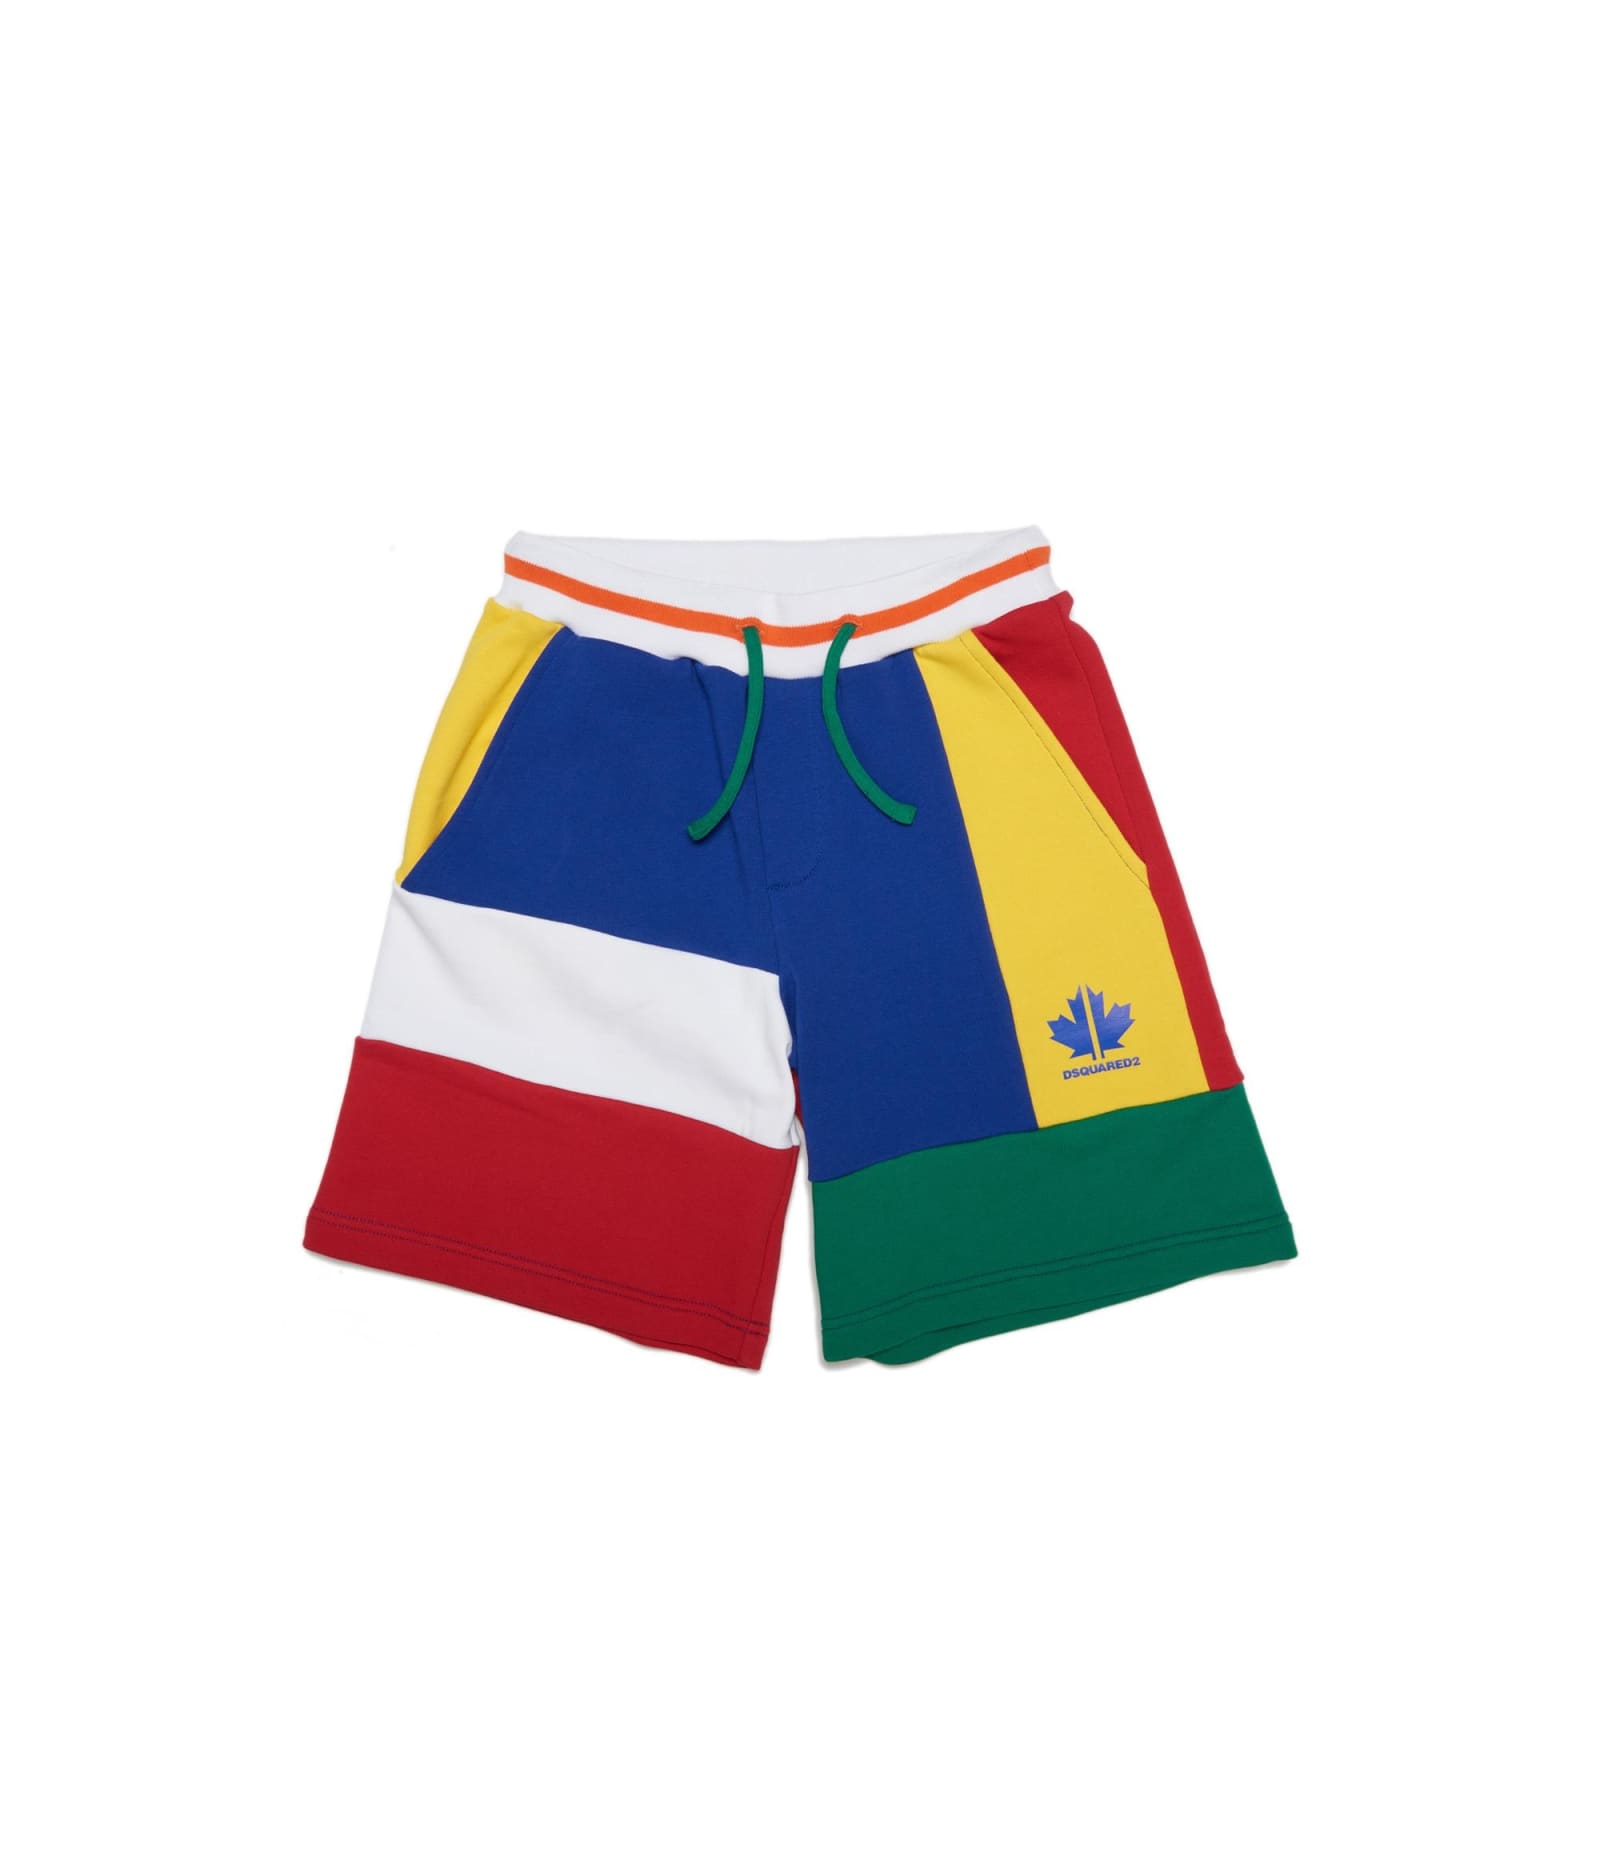 DSQUARED2 SPORTS SHORTS WITH COLOUR-BLOCK DESIGN